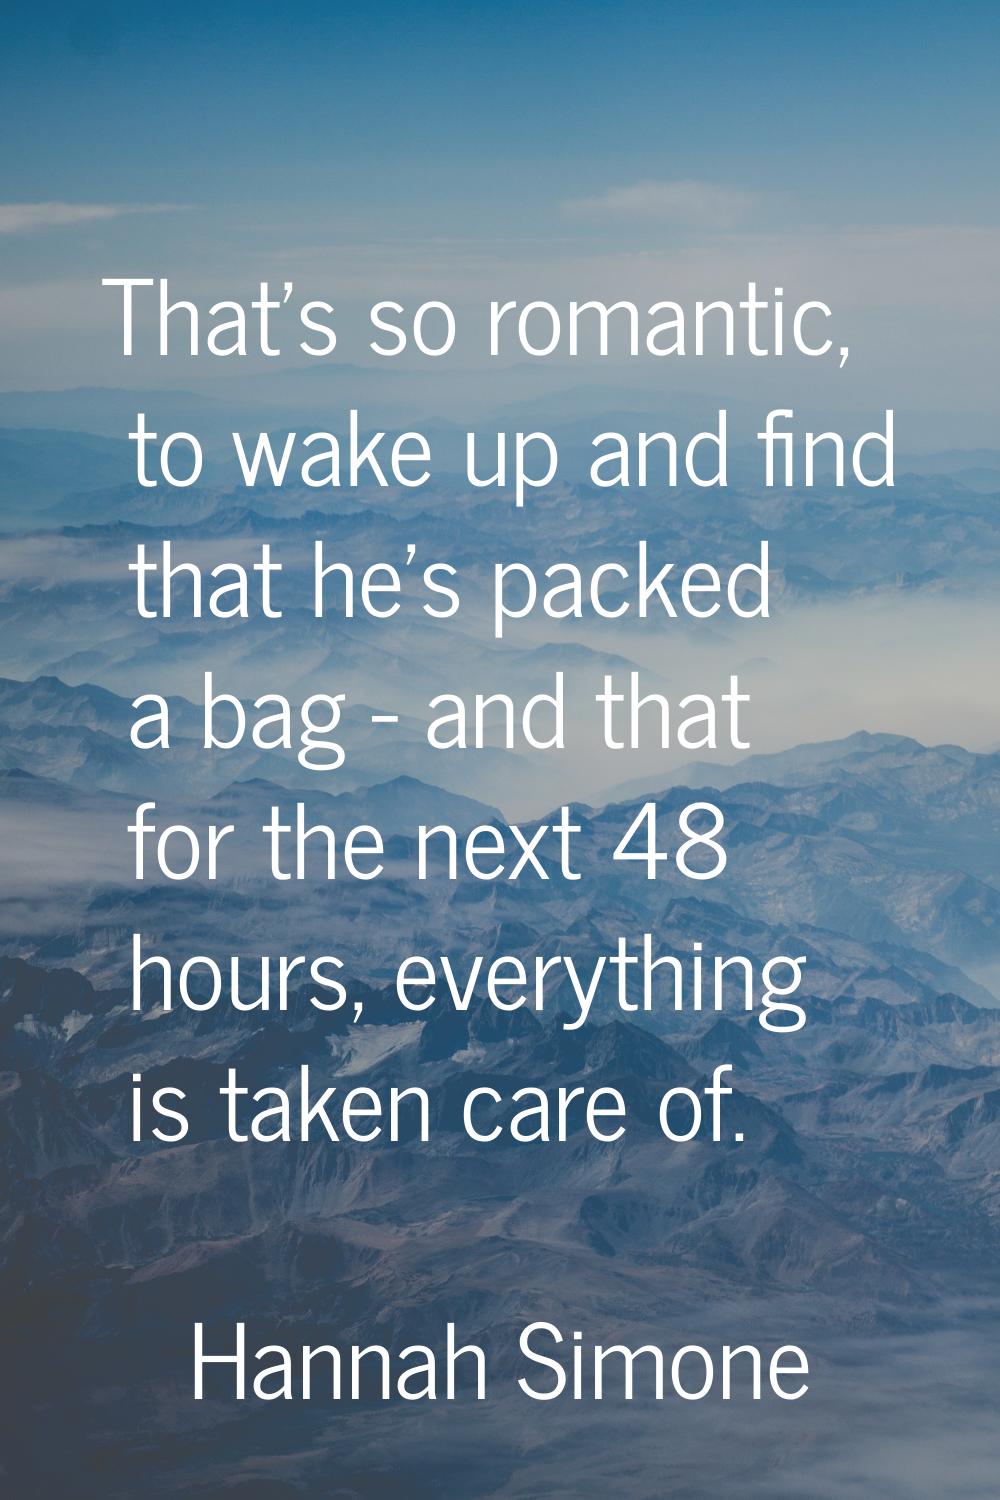 That's so romantic, to wake up and find that he's packed a bag - and that for the next 48 hours, ev